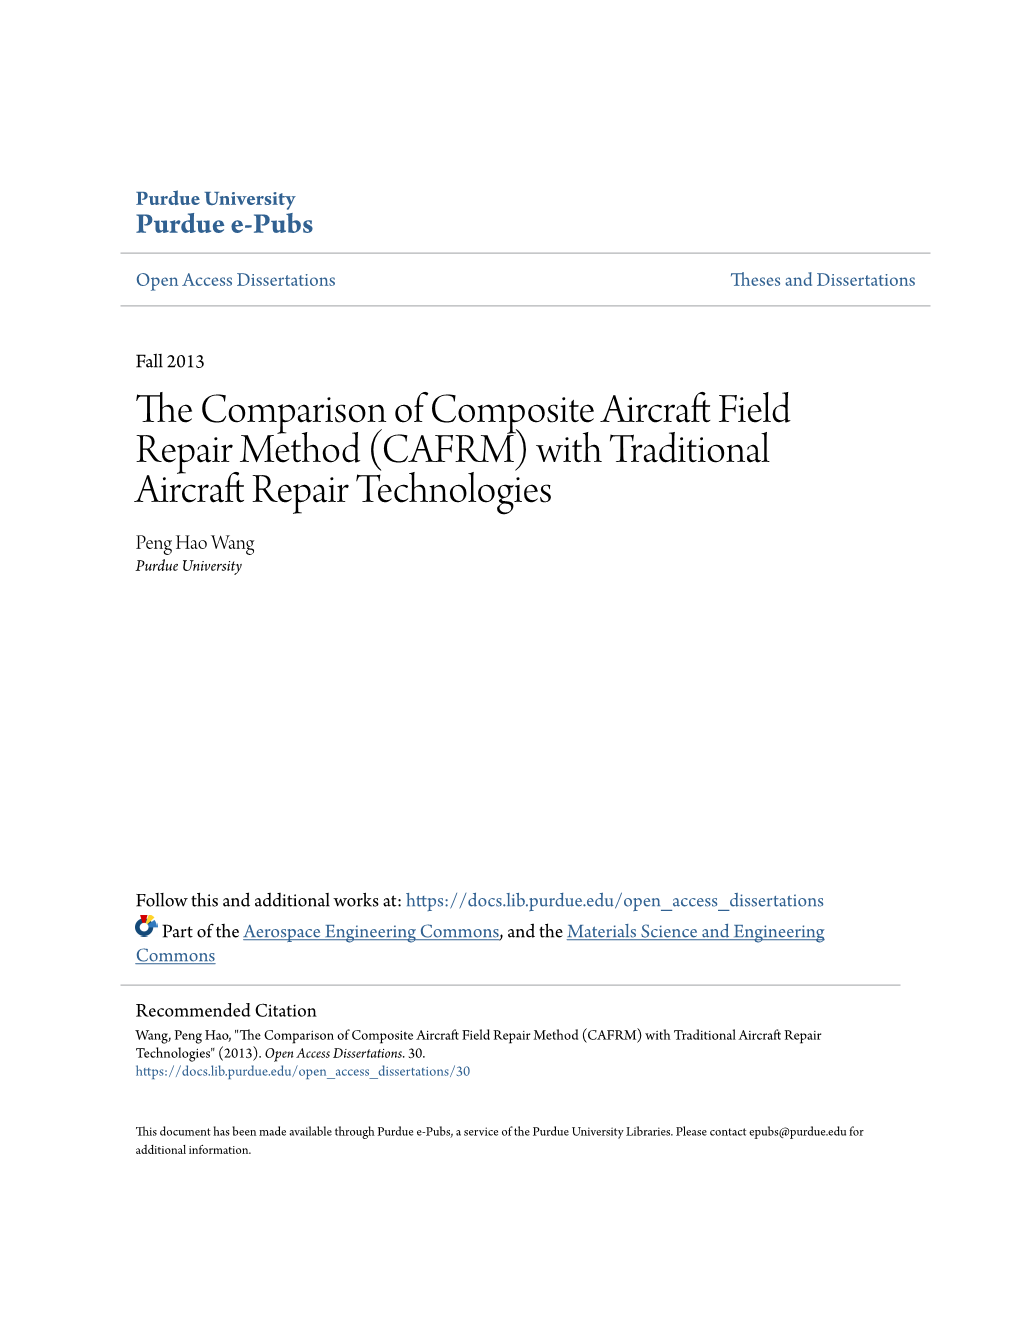 The Comparison of Composite Aircraft Field Repair Method (CAFRM) with Traditional Aircraft Repair Technologies